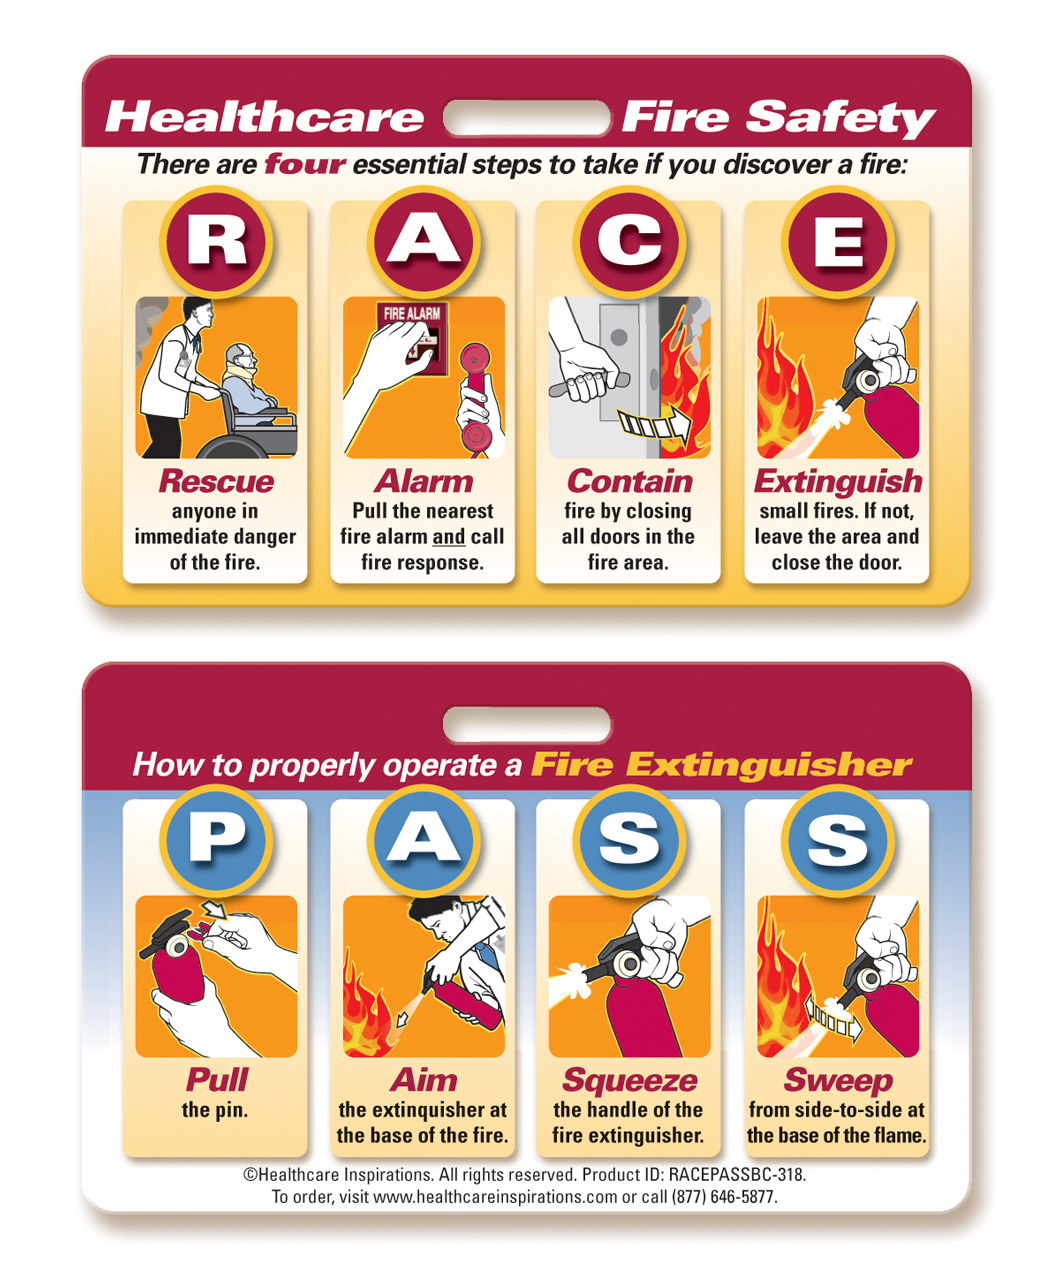 what does the acronym race stand for in healthcare